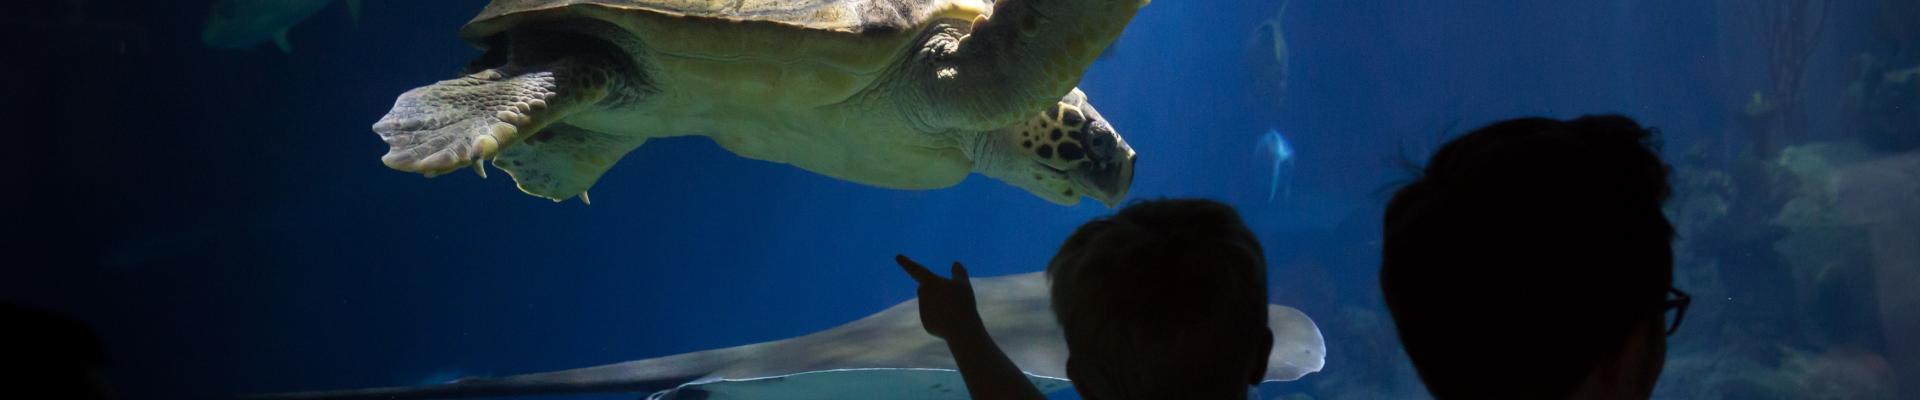 Silhouette of a young boy in the arms of an adult pointing at a loggerhead turtle in The Deep's Endless Ocean exhibit.